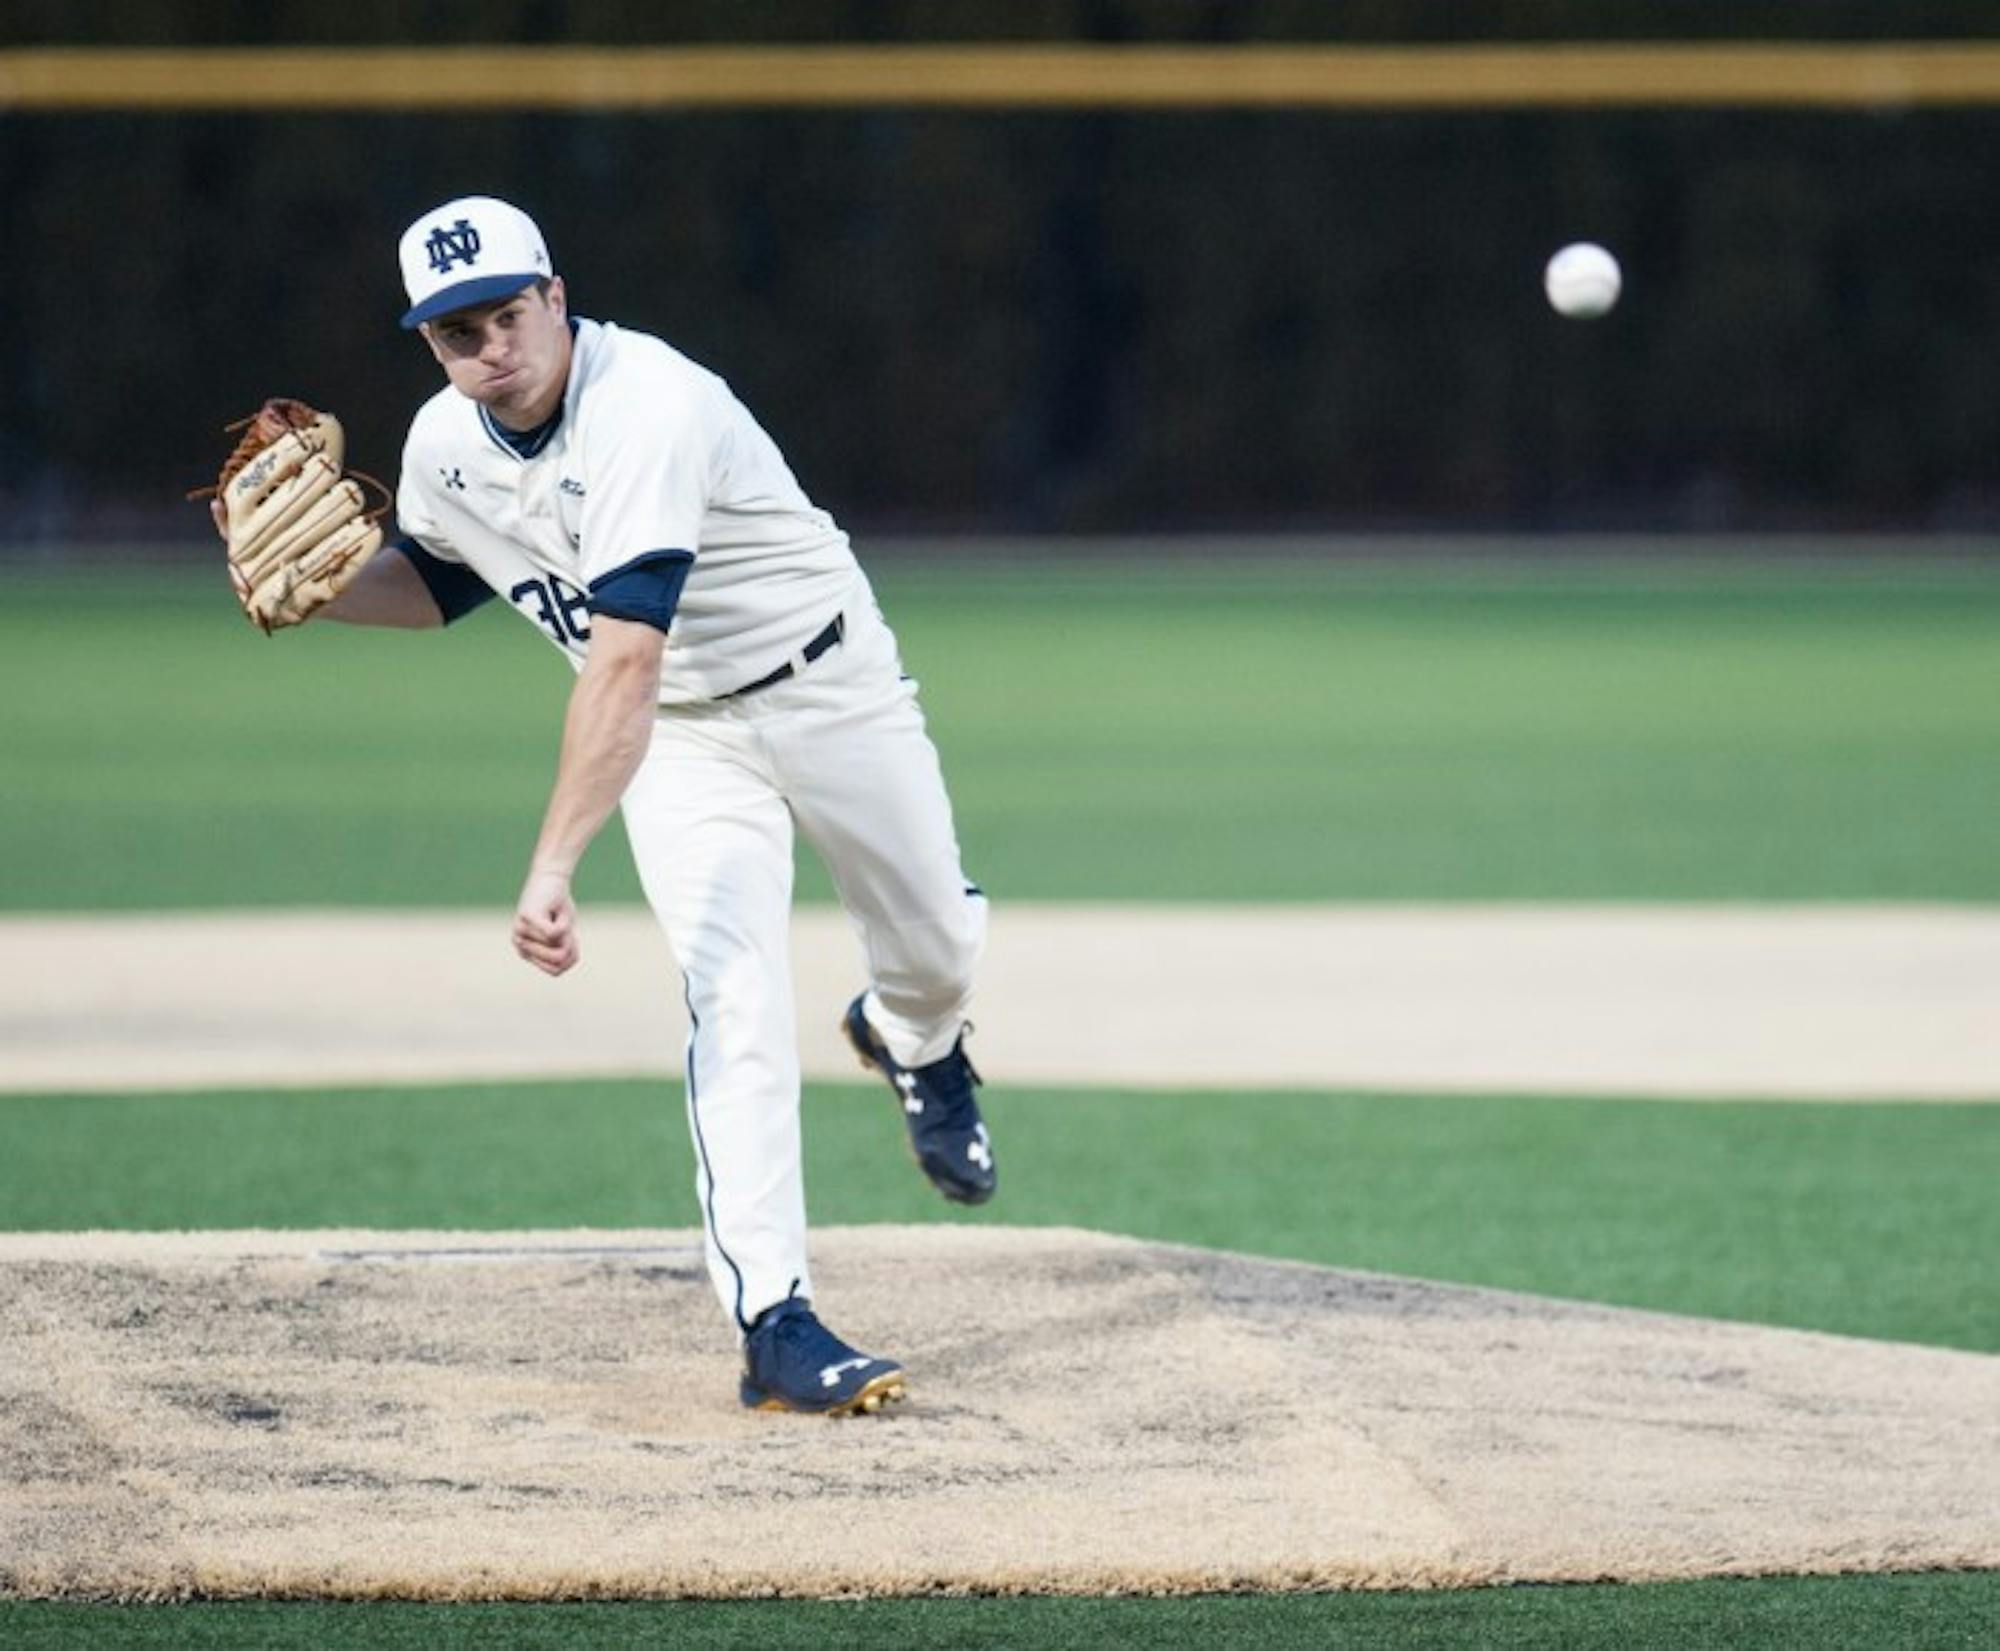 Junior lefty Scott Tully pitches for the Irish during their 8-3 victory over Central Michigan on March 18, 2015 at Eck Stadium. Tully earned the win Sunday, tossing two innings of one-run ball against Gonzaga.